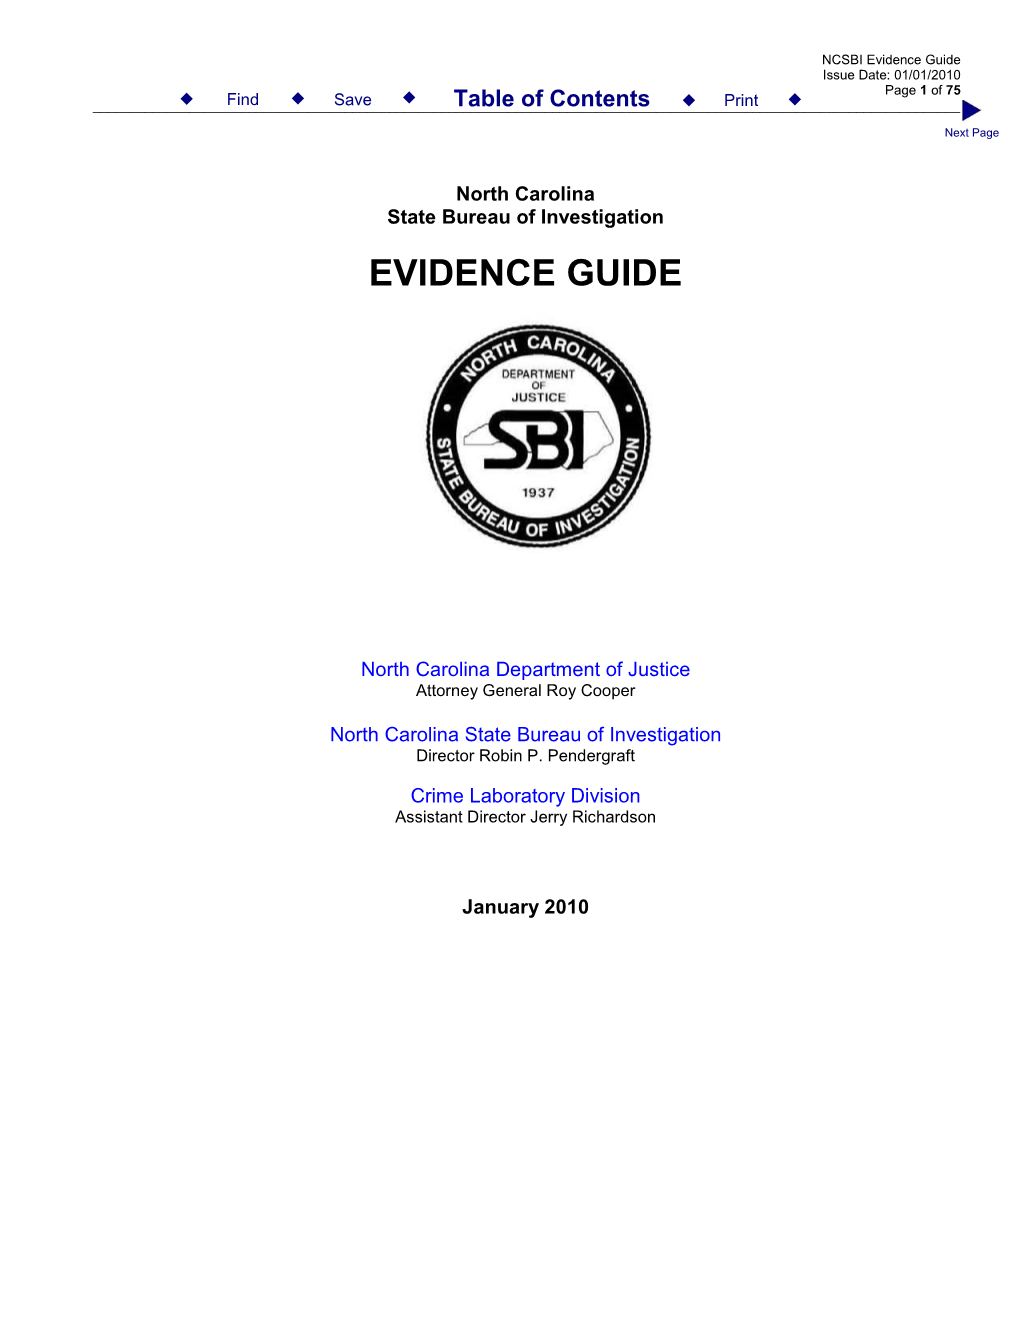 NCSBI Evidence Guide Issue Date: 01/01/2010 Page 1 of 75 ______